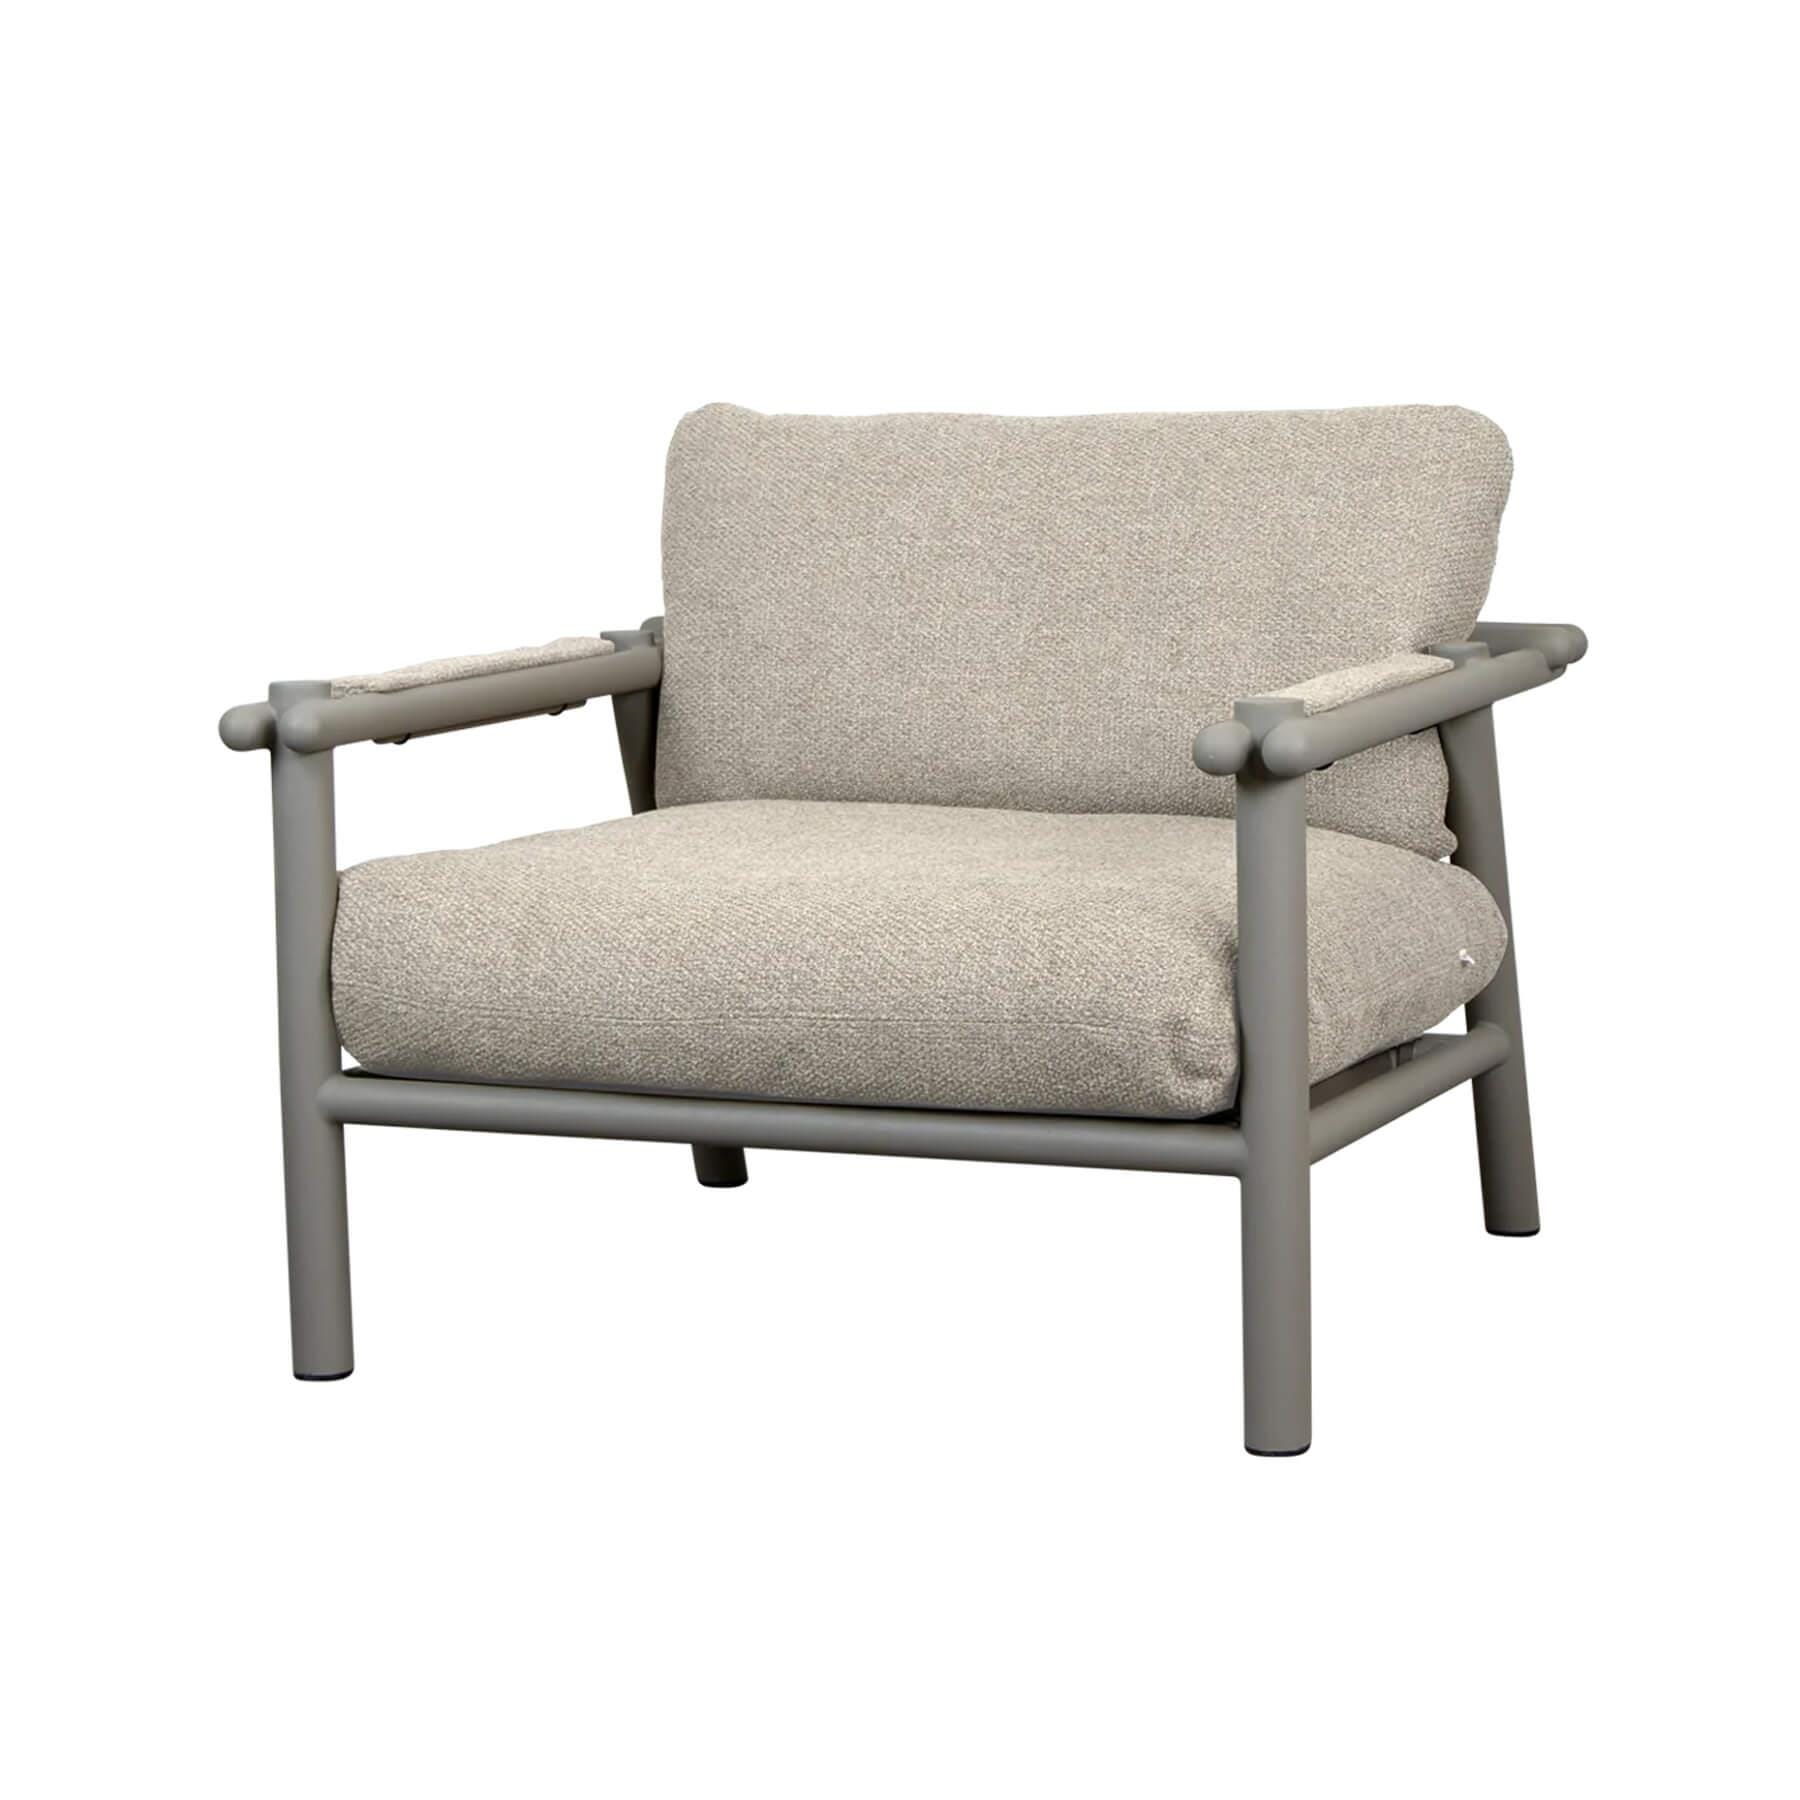 Caneline Sticks Outdoor Lounge Chair Taupe Desert Sand Cushion Grey